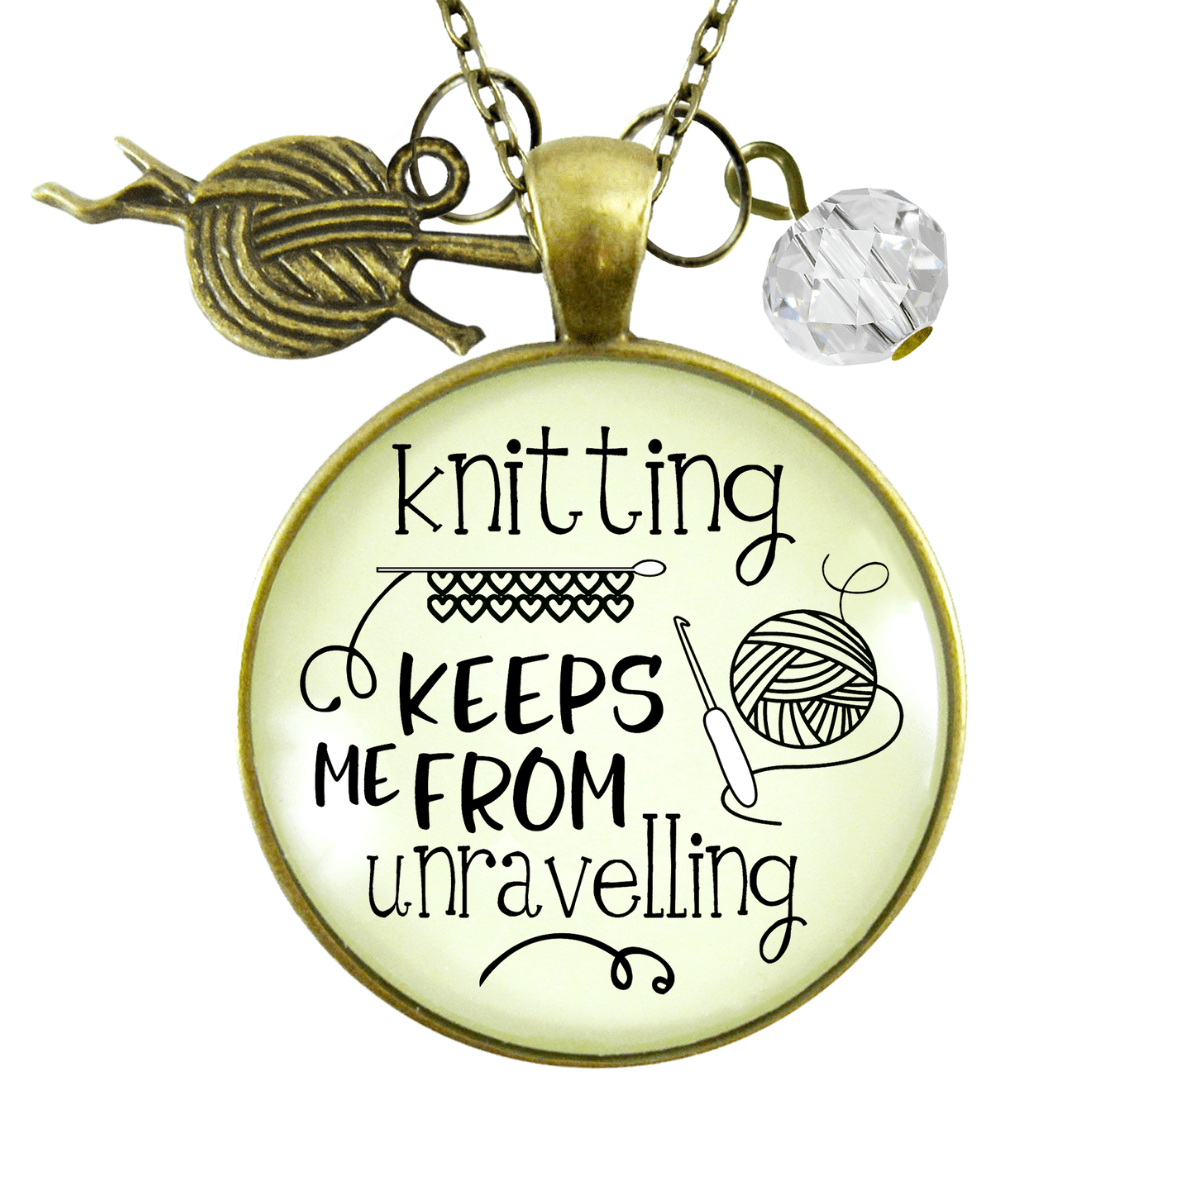 Gutsy Goodness Knitter Necklace Keeps Me from Unravelling Jewelry Gift Yarn Charm - Gutsy Goodness Handmade Jewelry;Knitter Necklace Keeps Me From Unravelling Jewelry Gift Yarn Charm - Gutsy Goodness Handmade Jewelry Gifts